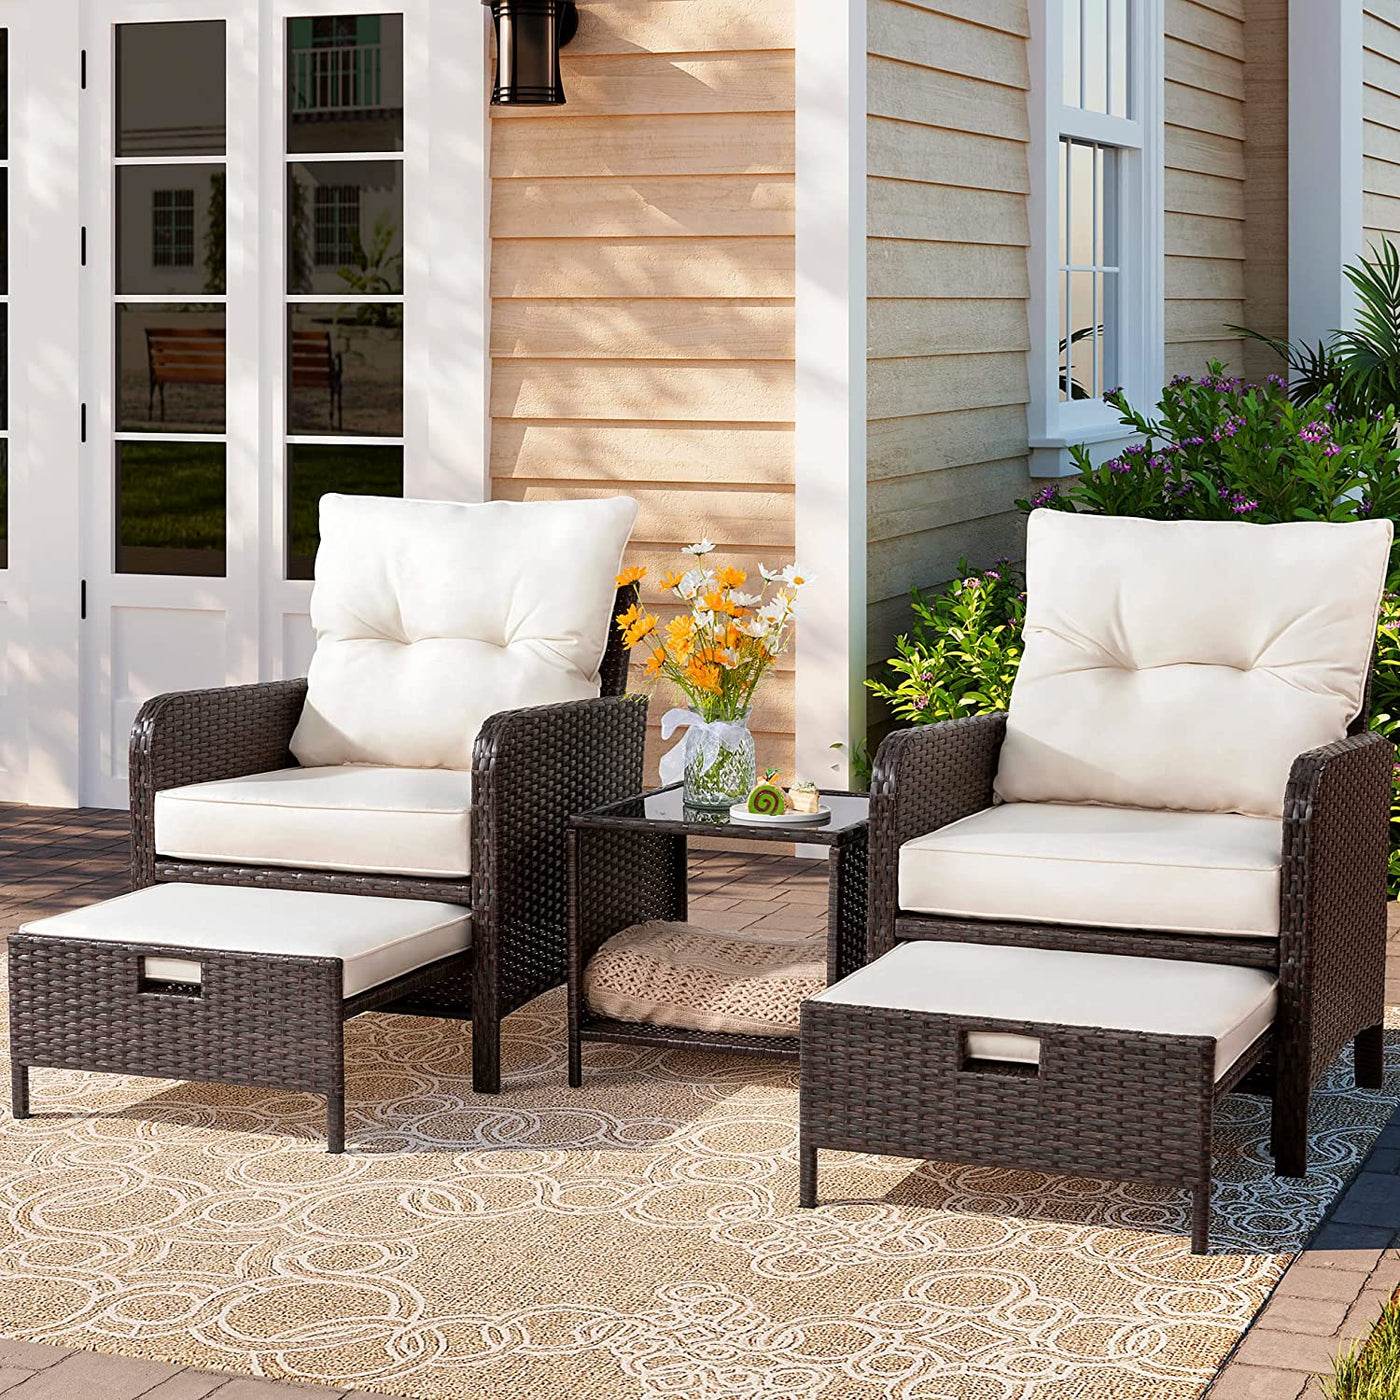 Walsunny 5 Piece Outdoor Recliner Conversation Set With Beige Cushions, Wicker PE Rattan